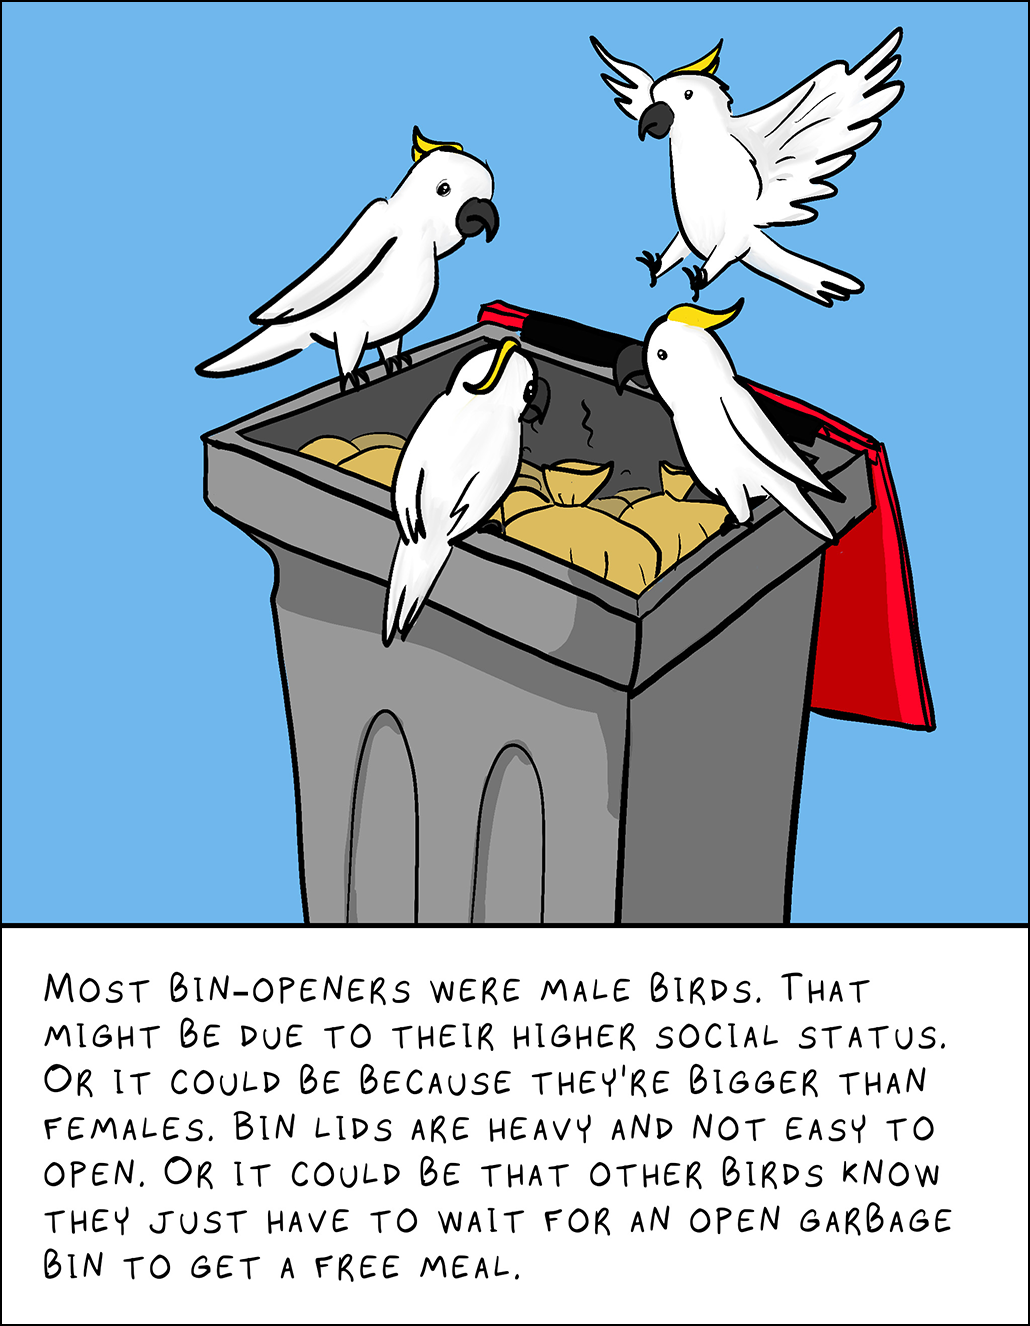 Image: Four cockatoos look into a trash bin. Text: Most bin-openers were male birds. That might be due to their higher social status. Or it could be because they’re bigger than females. Bin lids are heavy and not easy to open. Or it could be that other birds know they just have to wait for an open garbage bin to get a free meal.